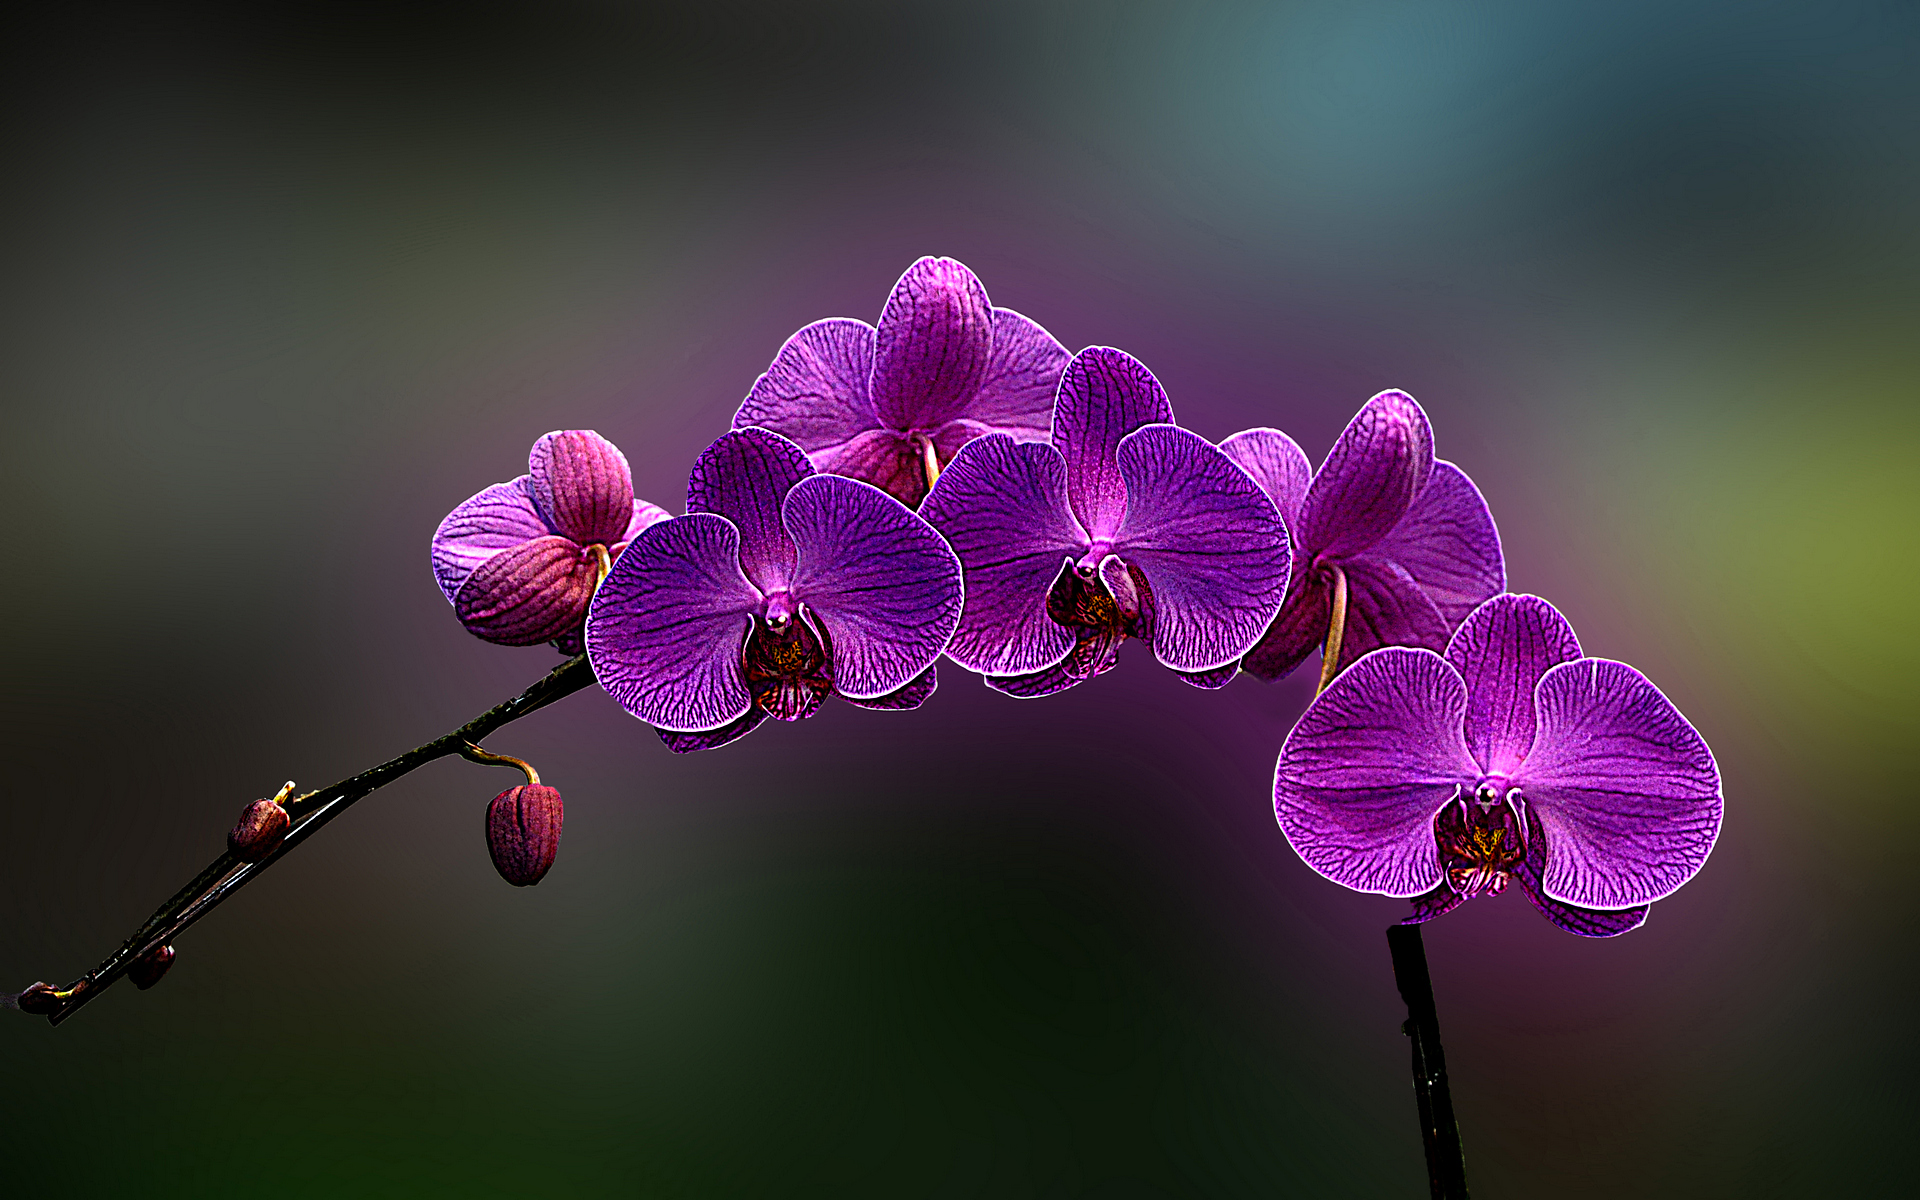 HDR photograph showcasing a stunning orchid flower by Hafiz, perfect for desktop wallpaper.